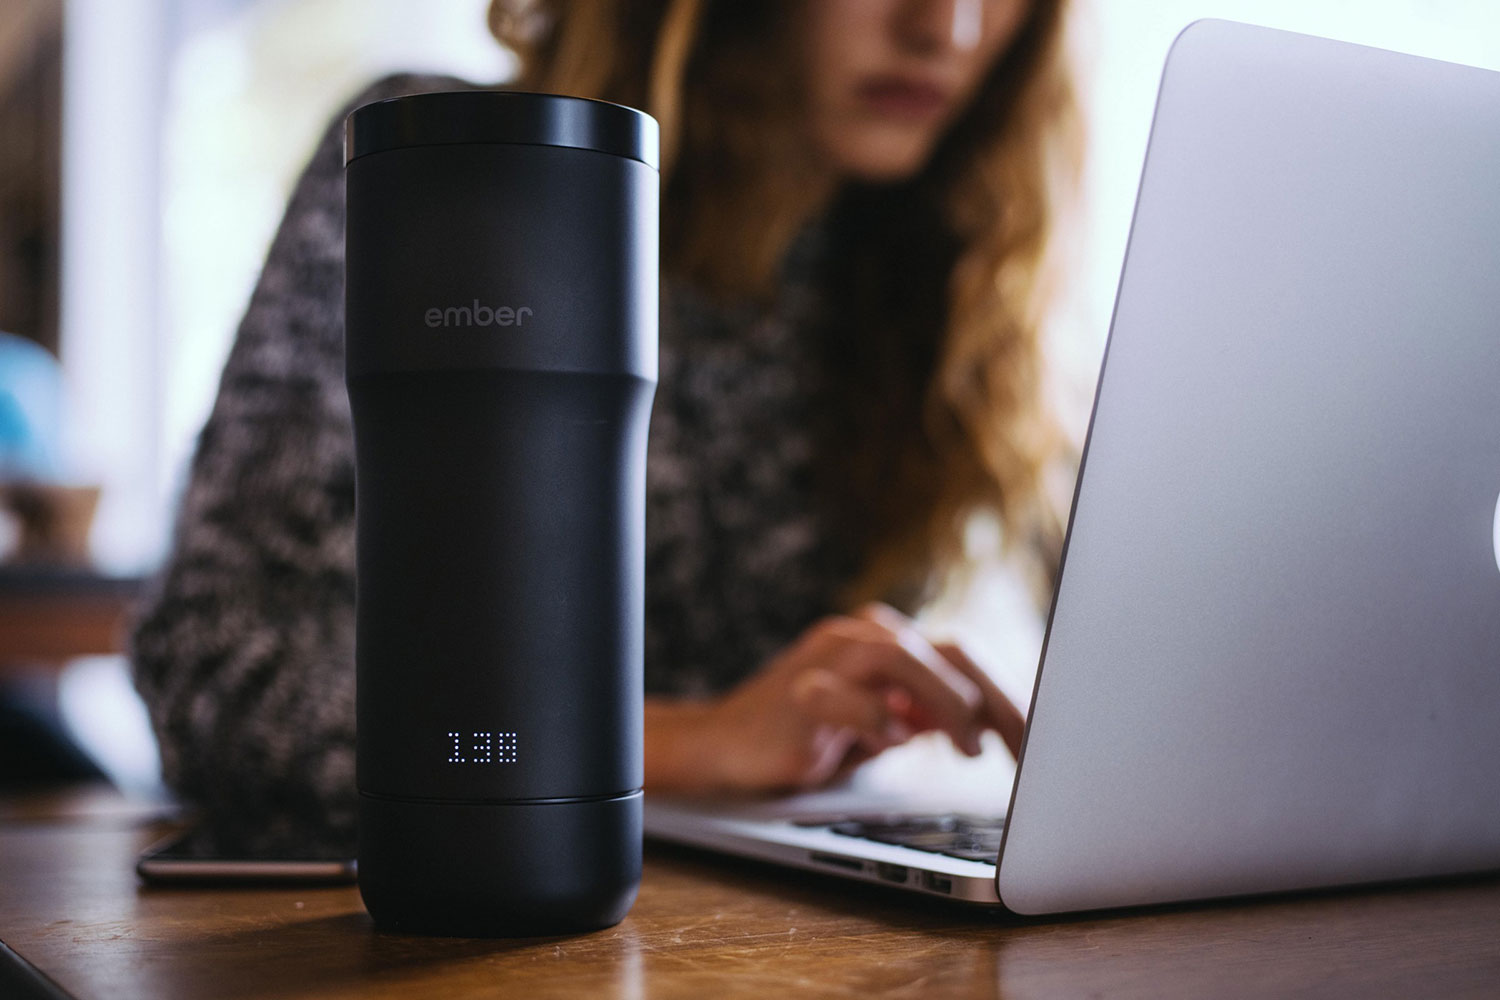 Ember Tumbler Review: A Perfectly Smart Coffee Cup